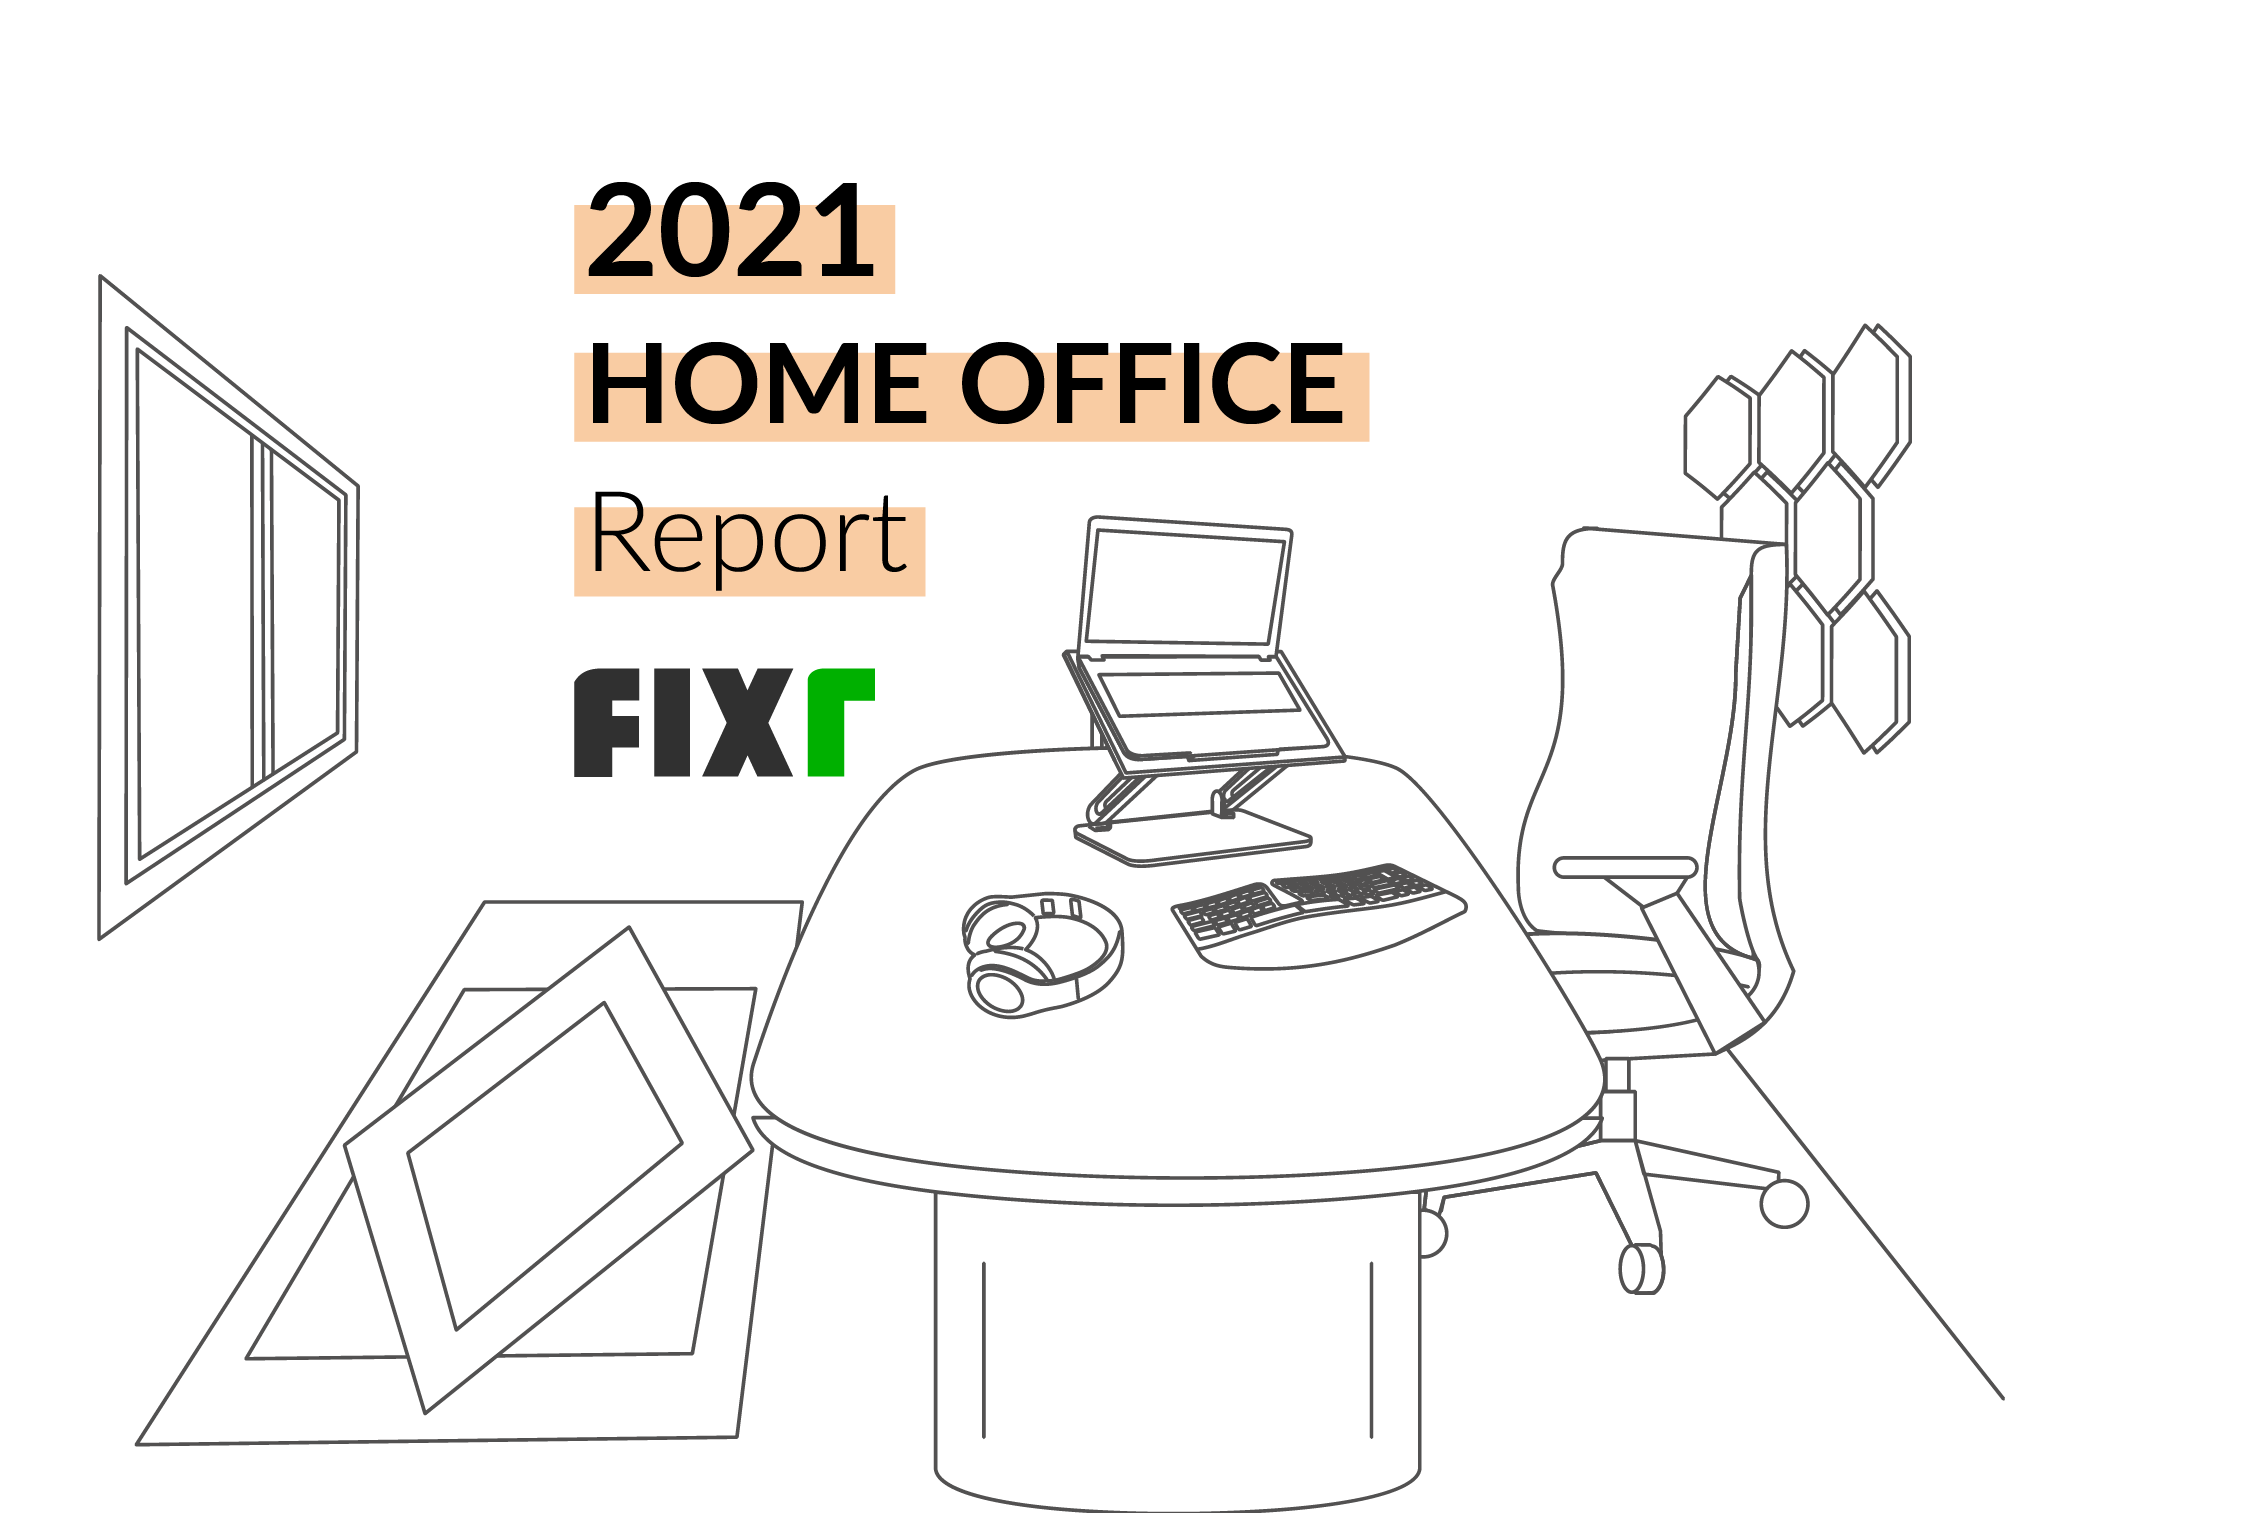 Home Office Design in 2021: Key Insights and Expert Recommendations